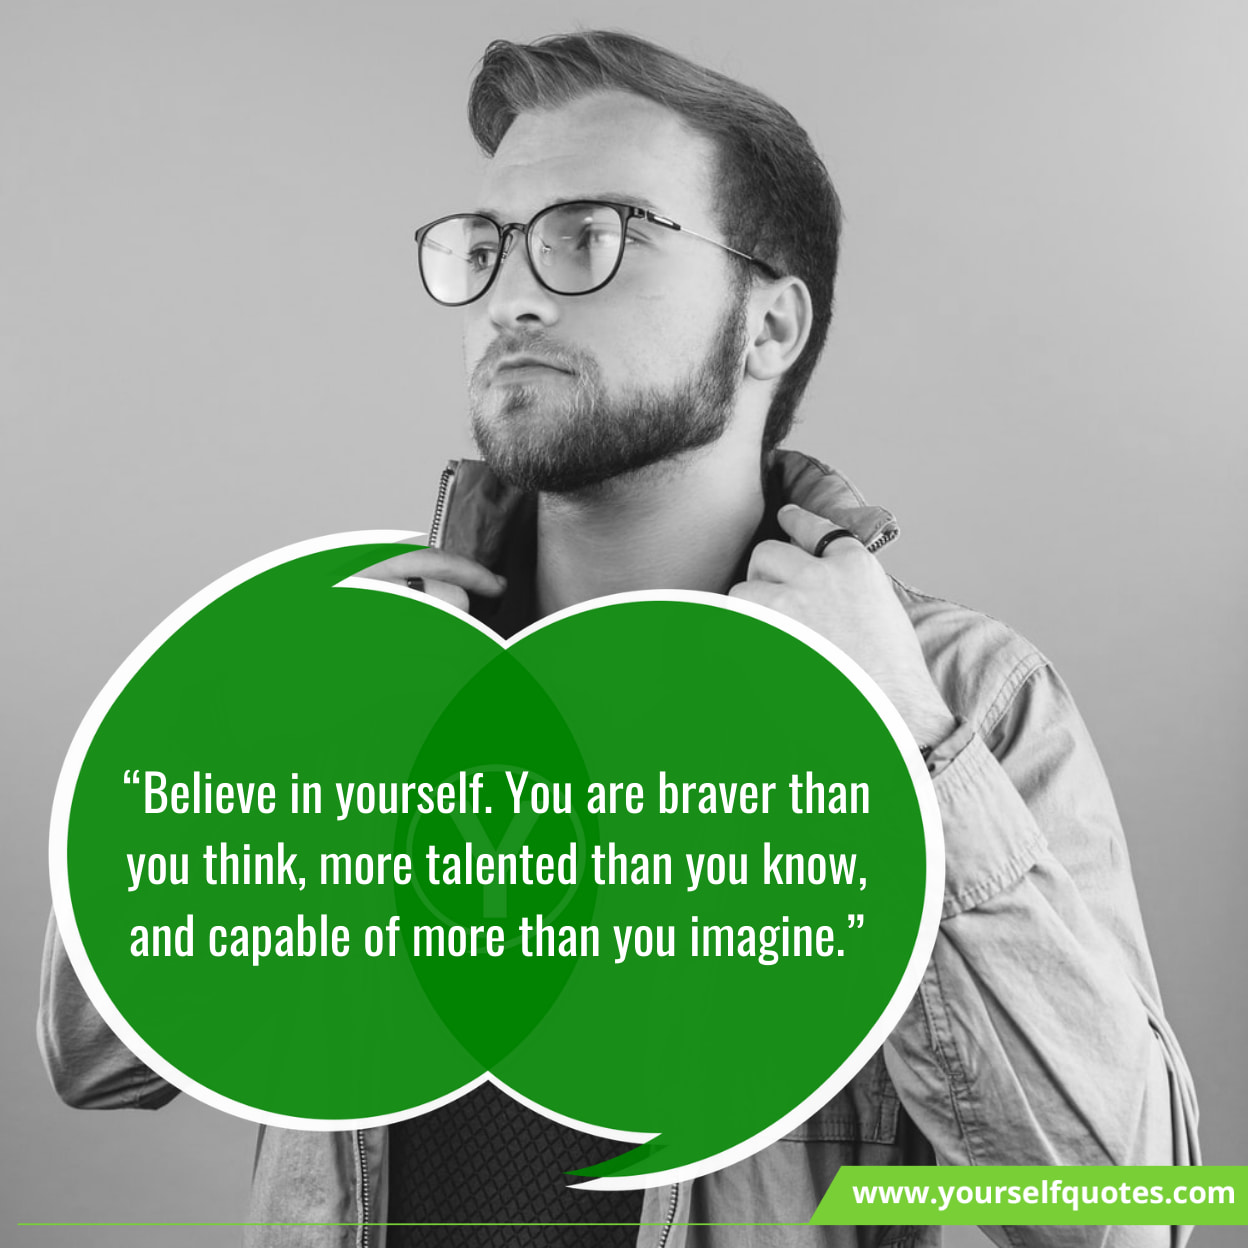 Believe in Yourself Quotes On Success